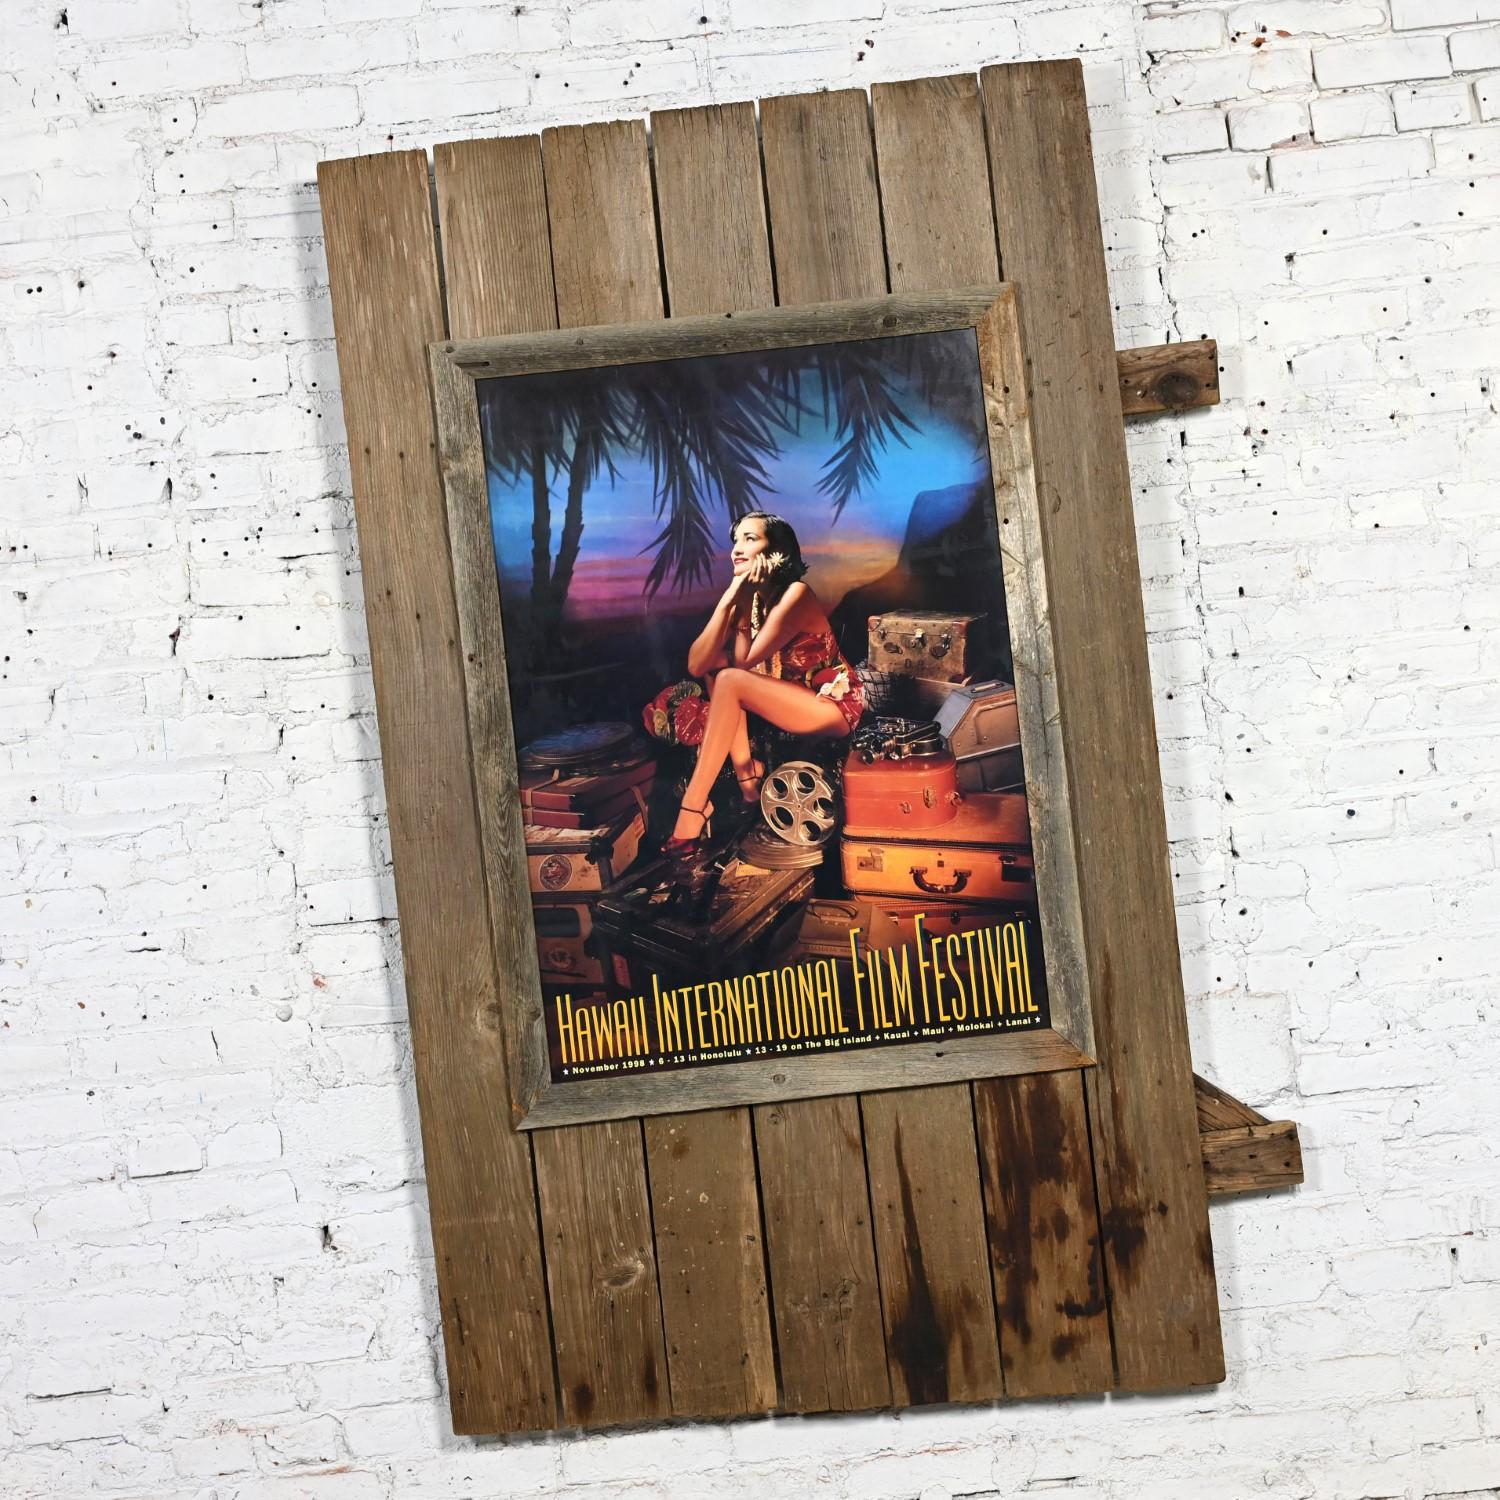 American 1998 Hawaii International Film Festival Movie Poster on Large Scale Rustic Wood  For Sale